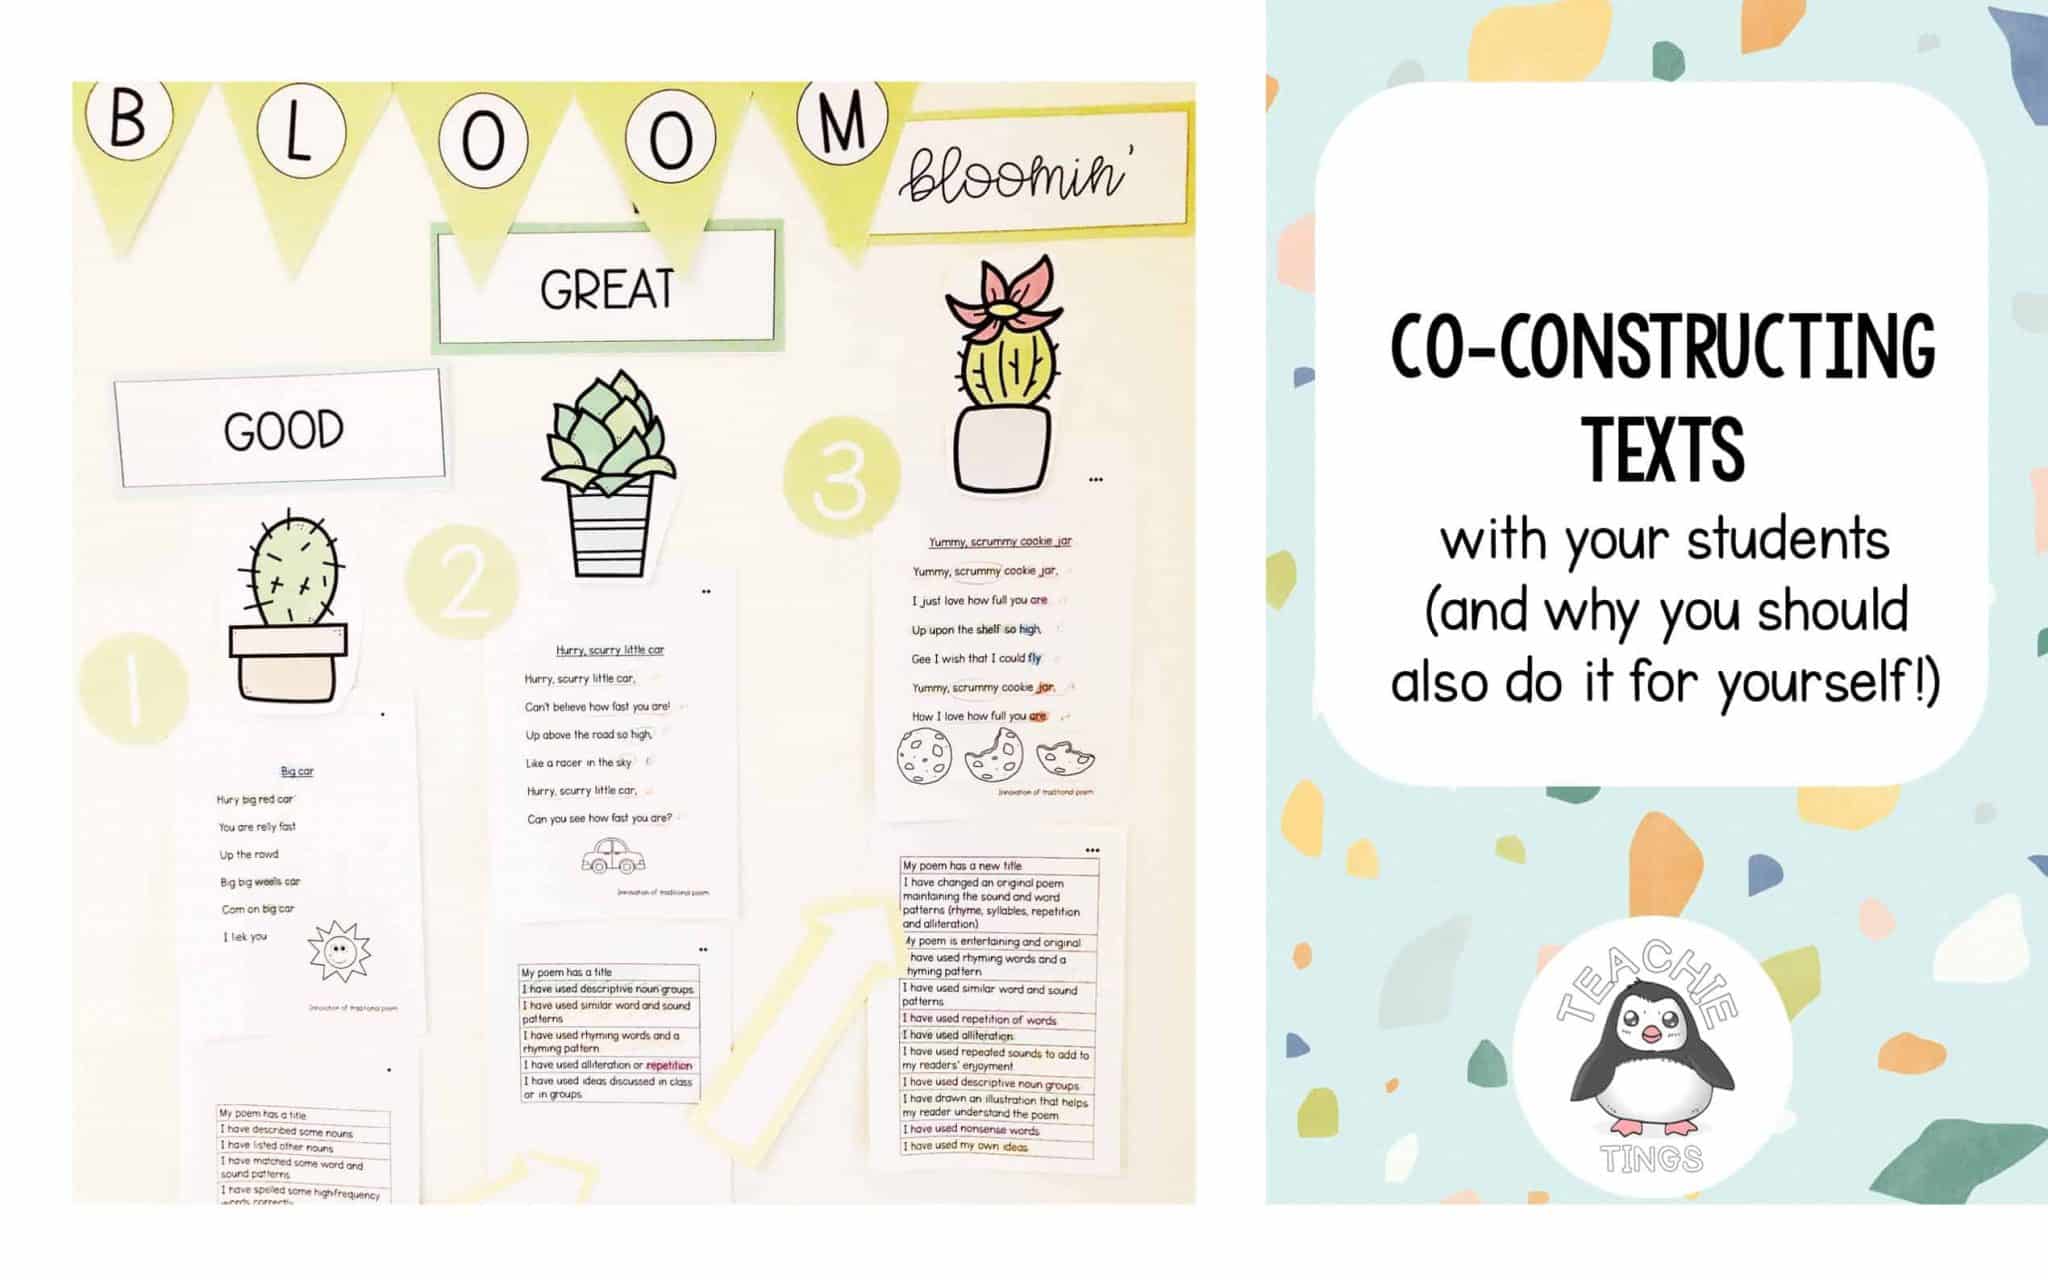 co-constructing texts with your students